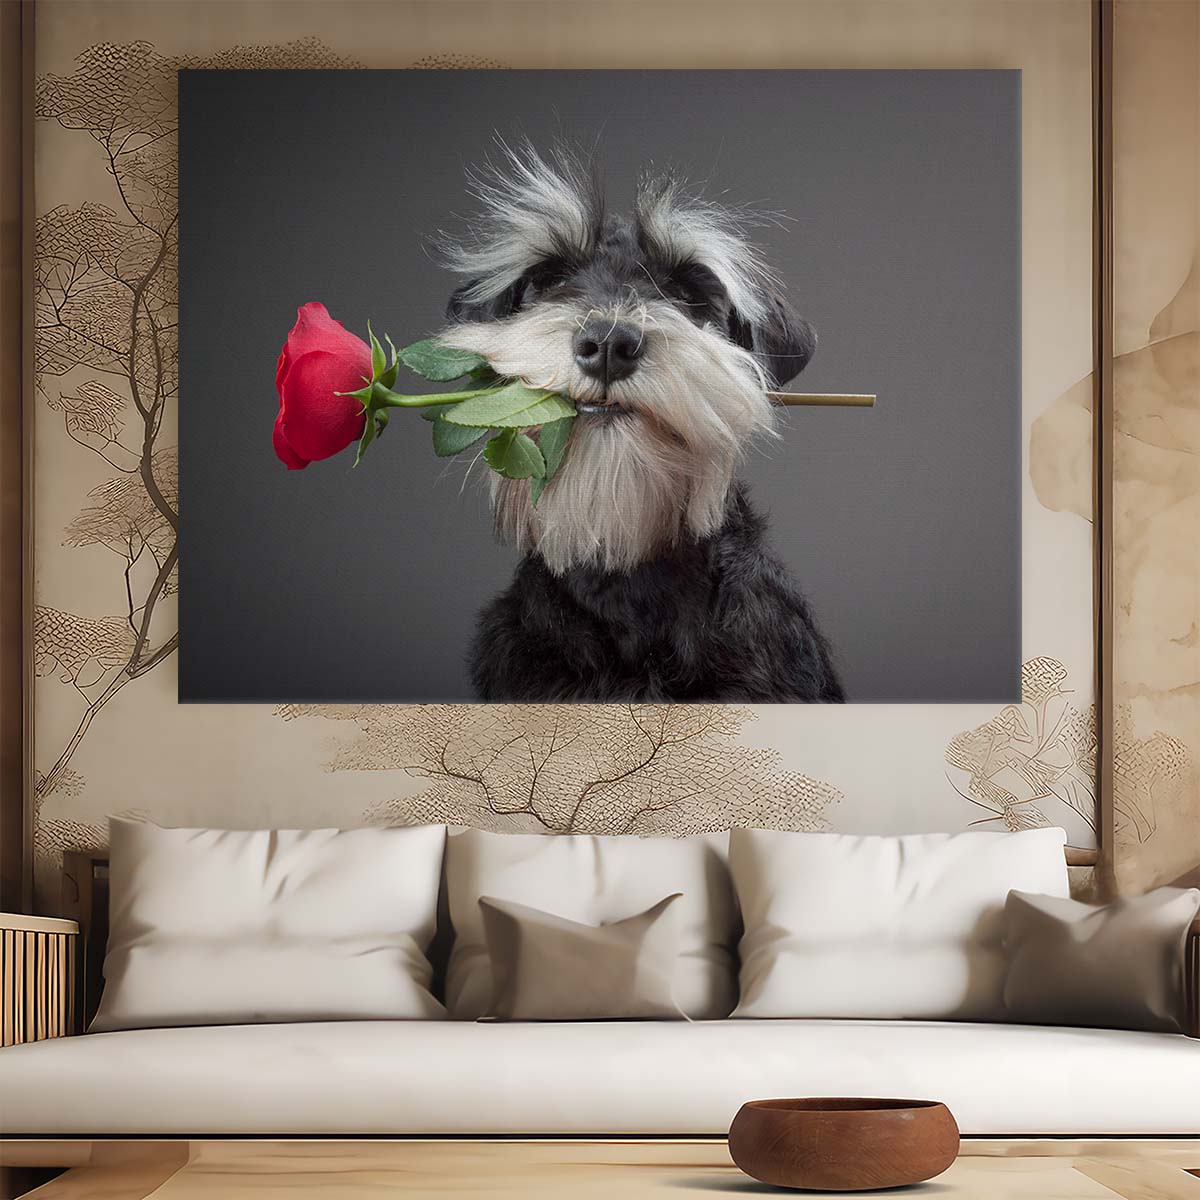 Romantic Schnauzer & Rose Proposal Wall Art by Luxuriance Designs. Made in USA.